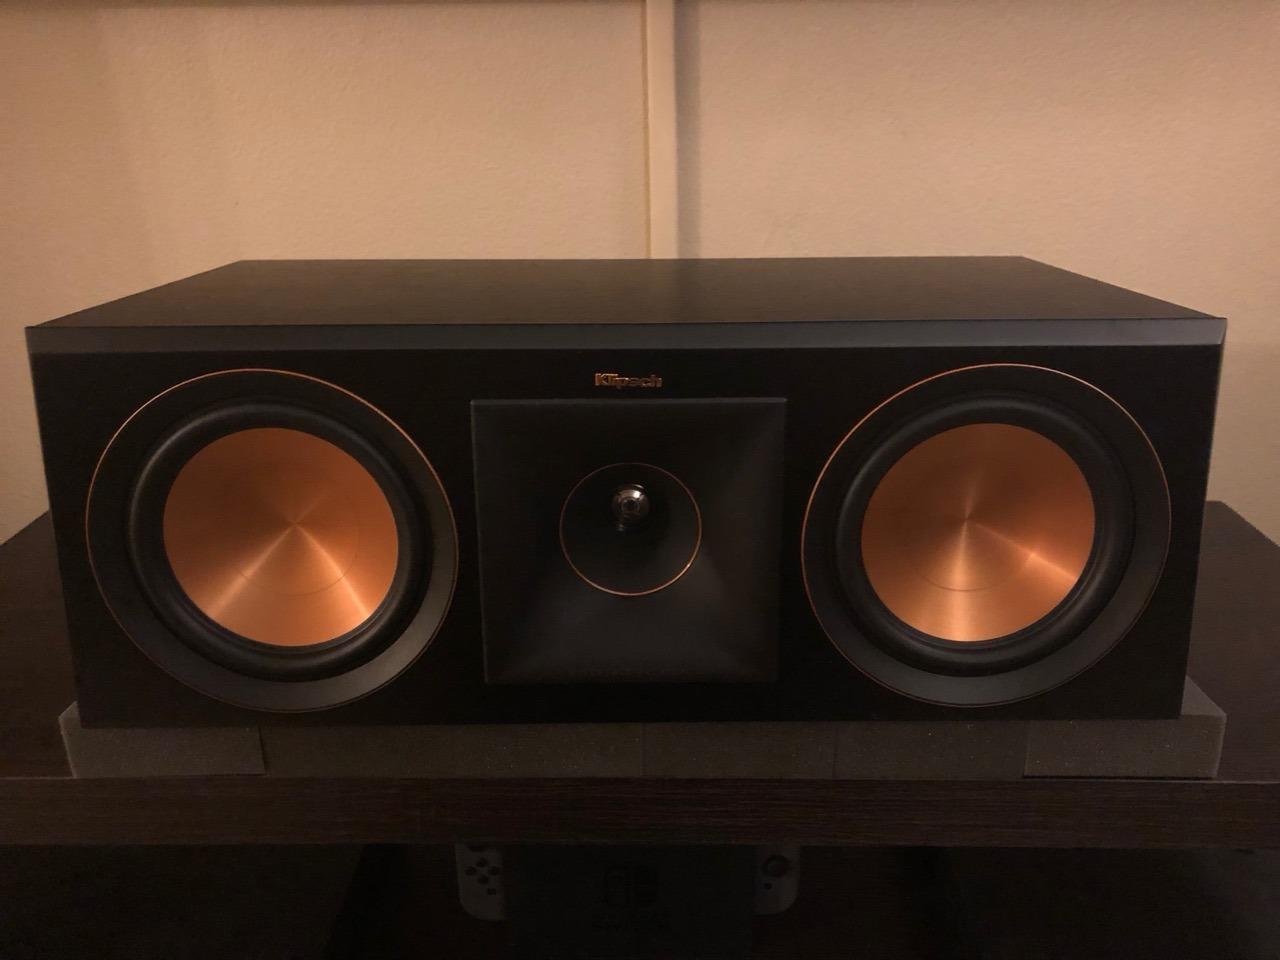 New Klipsch owner and wow!